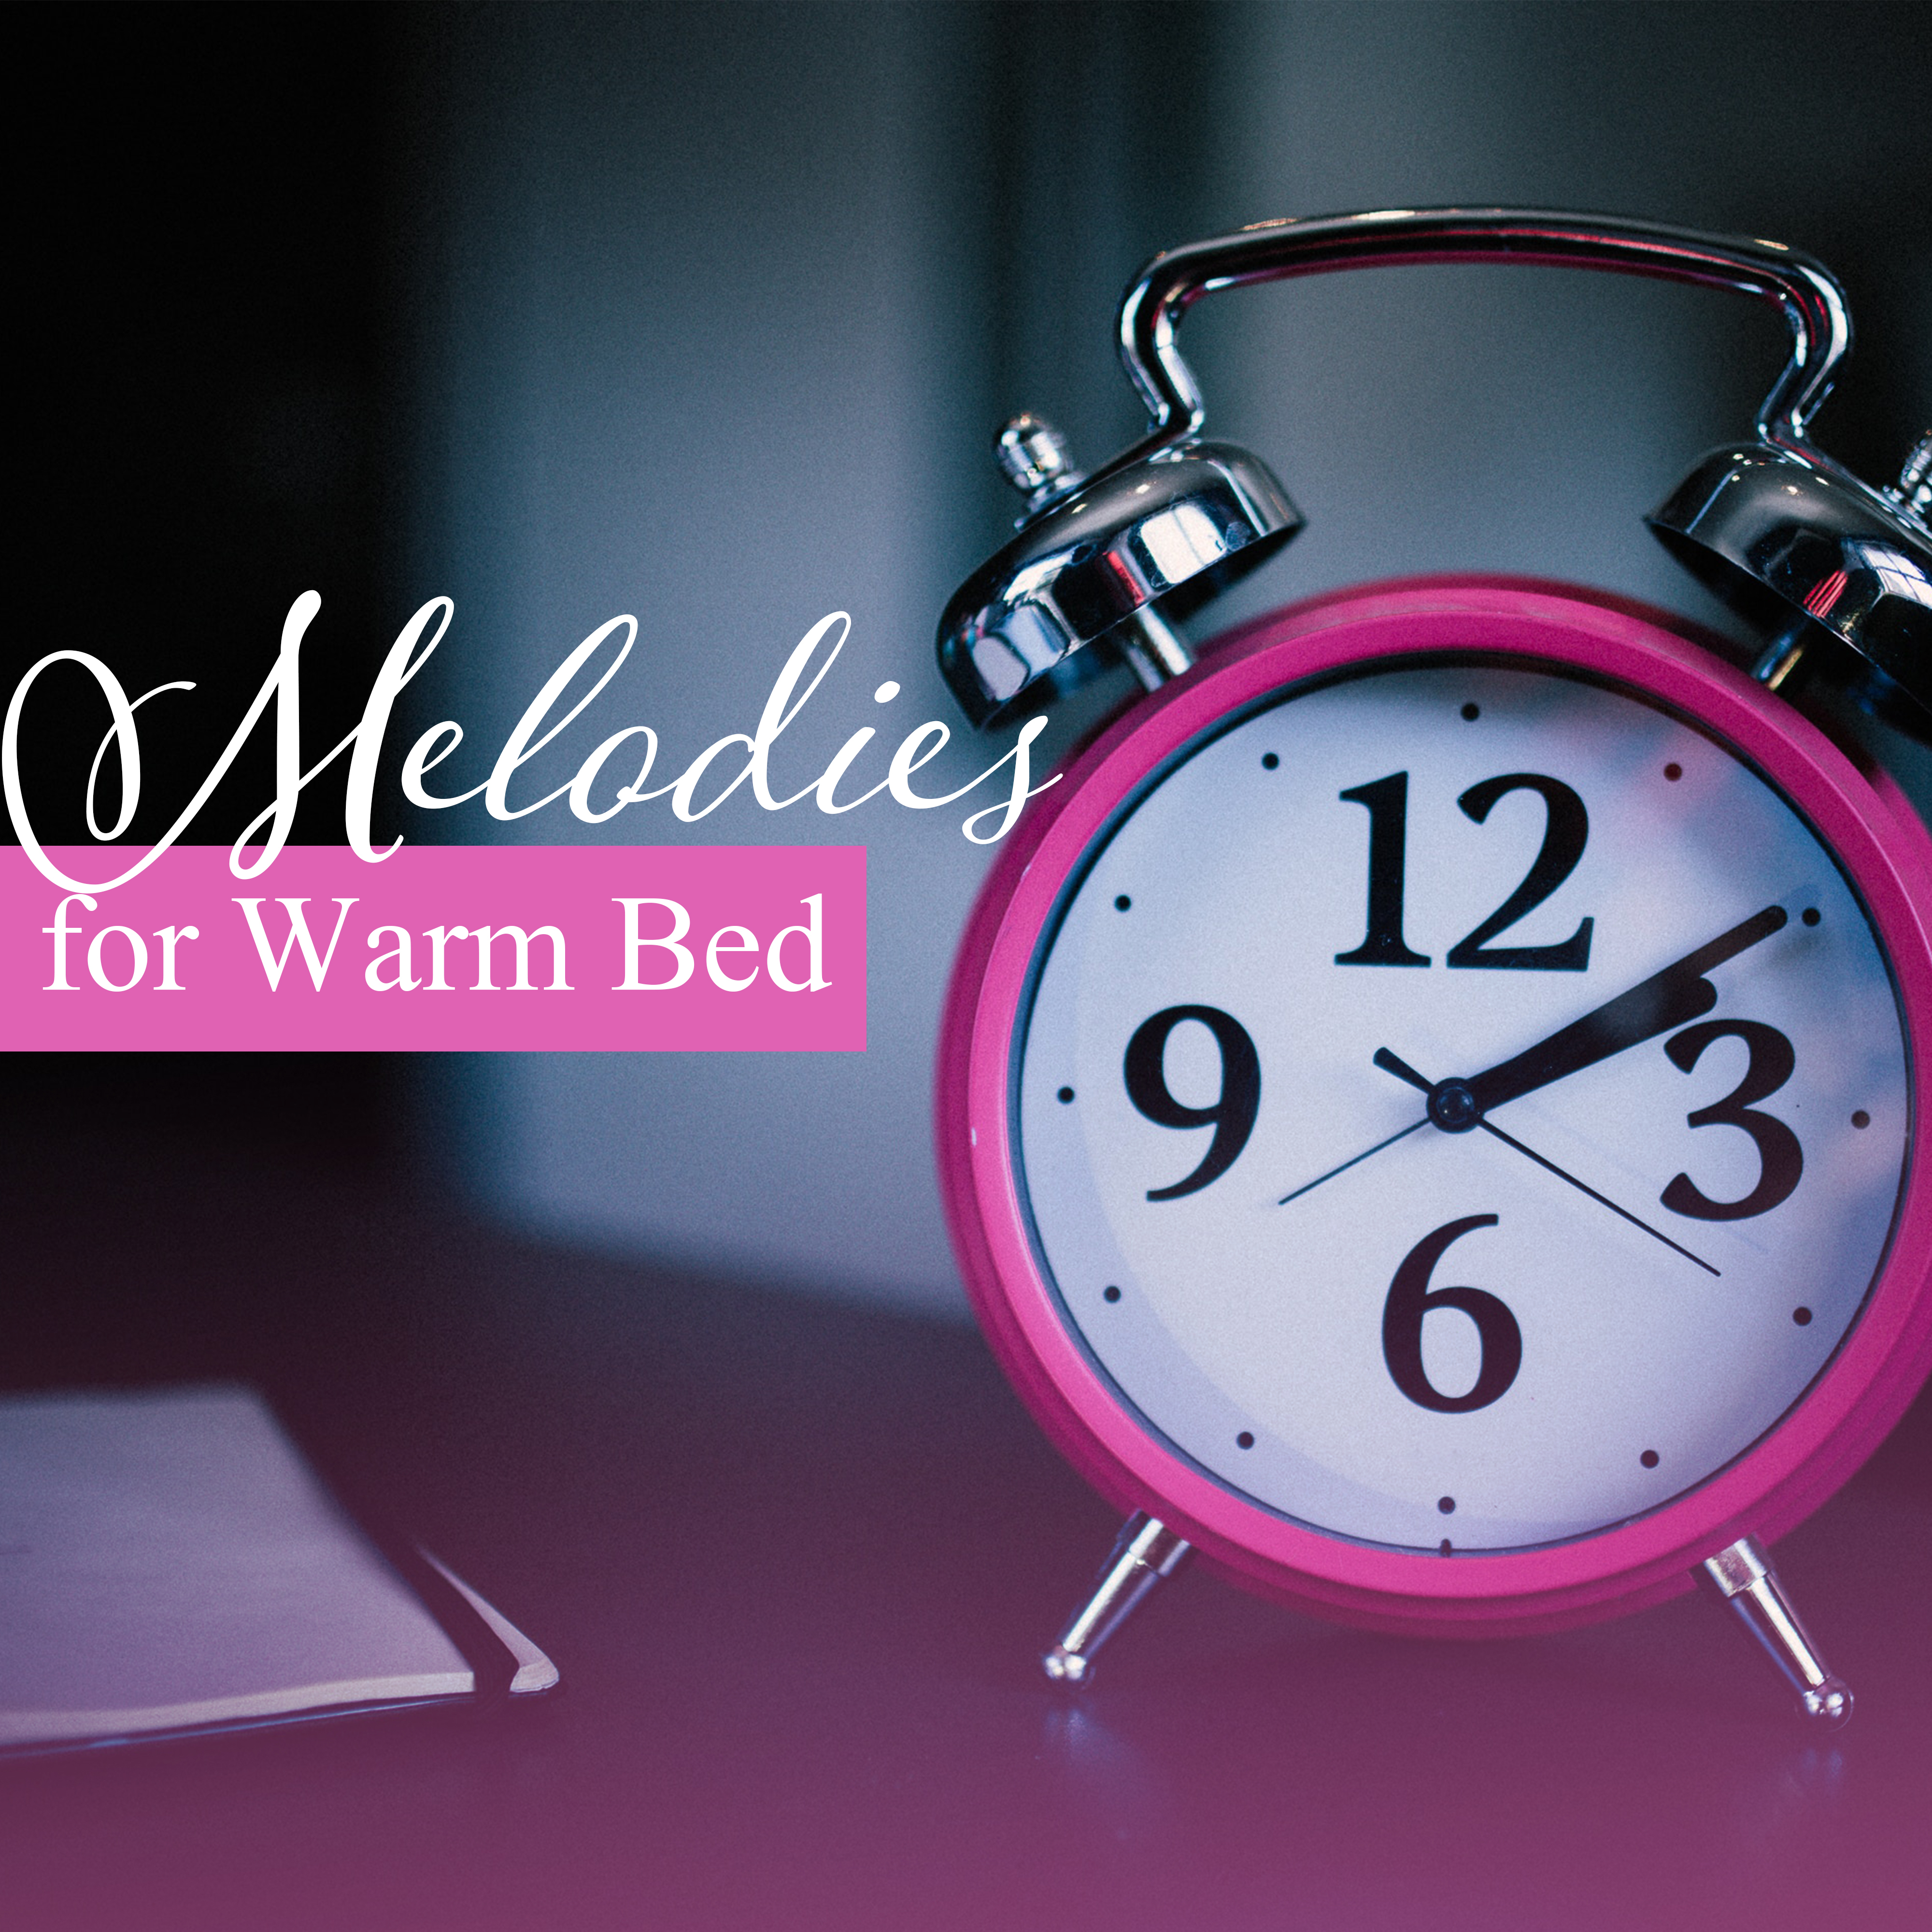 Melodies for Warm Bed  Lullabies, Soft Music at Goodnight, Naptime, Restful Sleep, Pure Mind